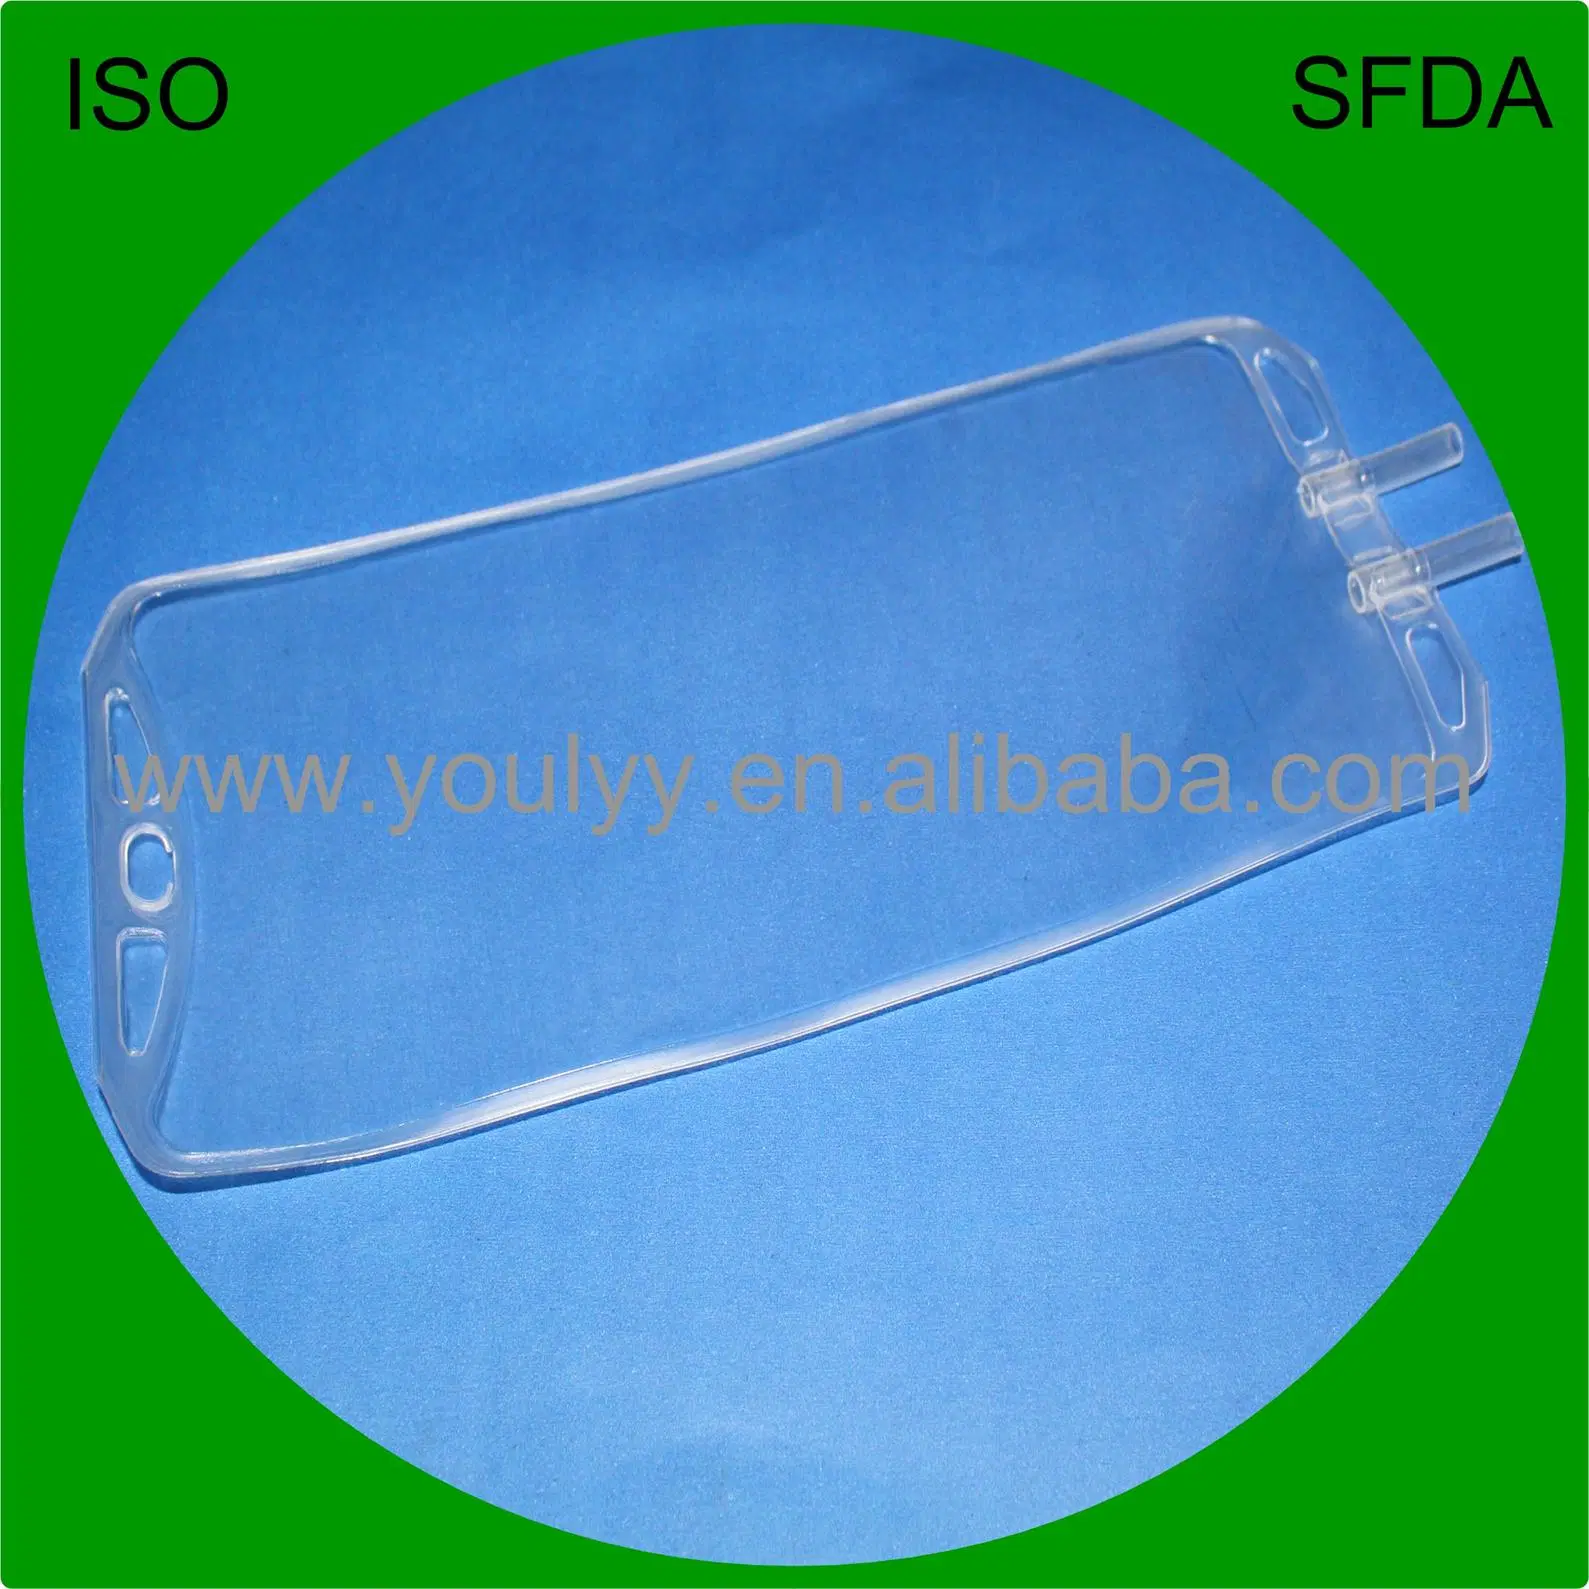 Saline Solution IV Bags for Sale